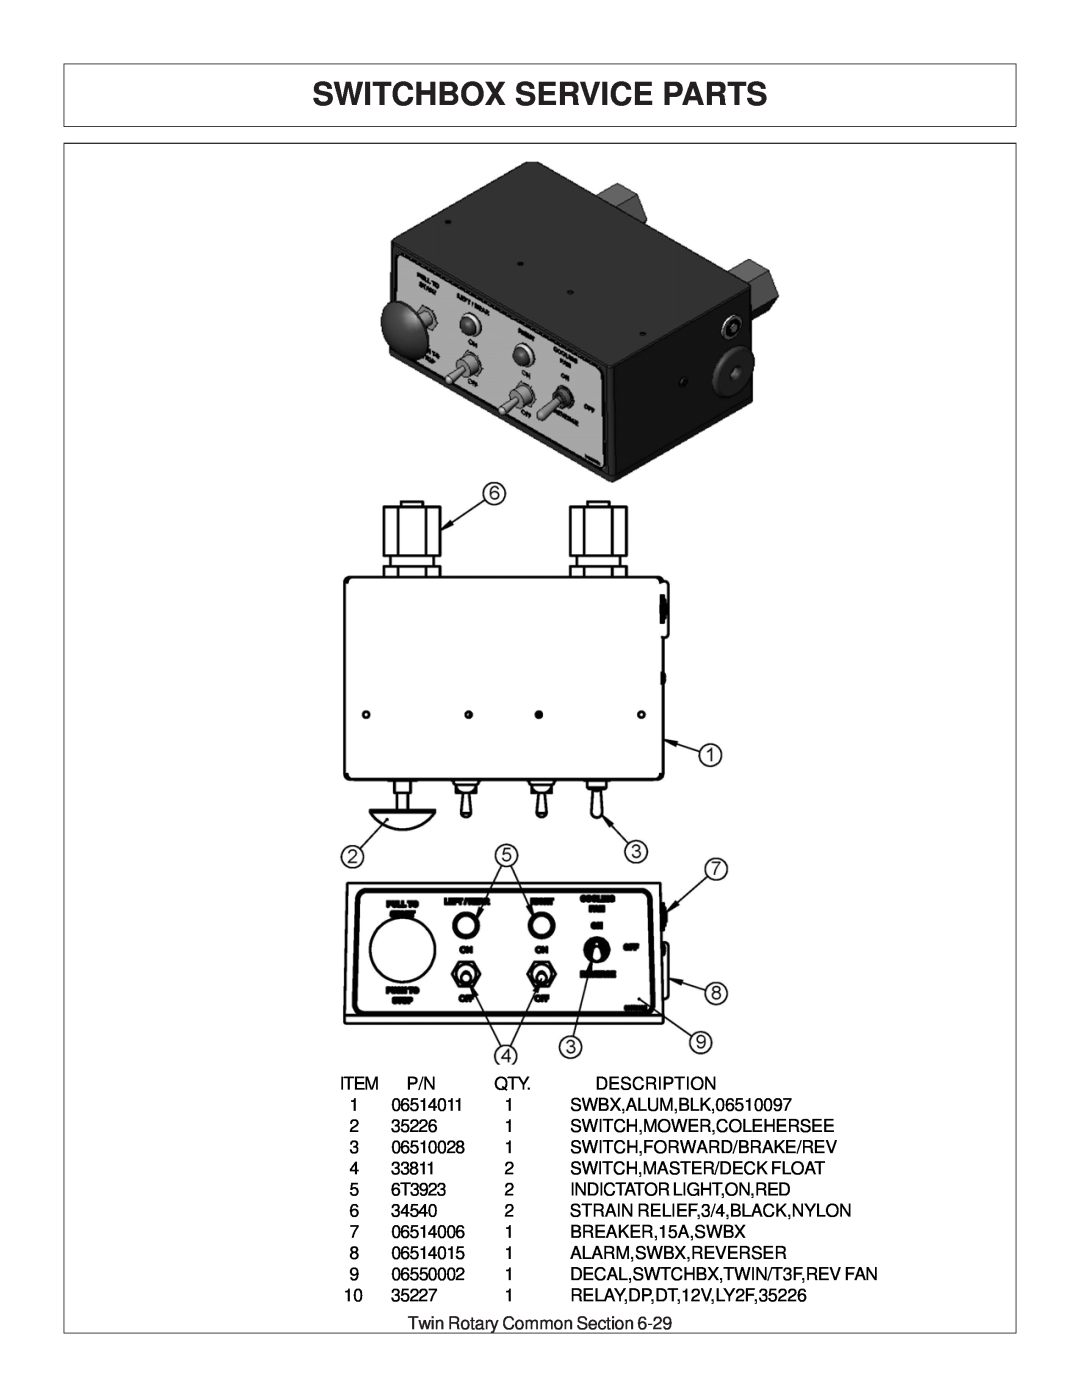 Tiger Products Co., Ltd 6020009 manual Switchbox Service Parts 